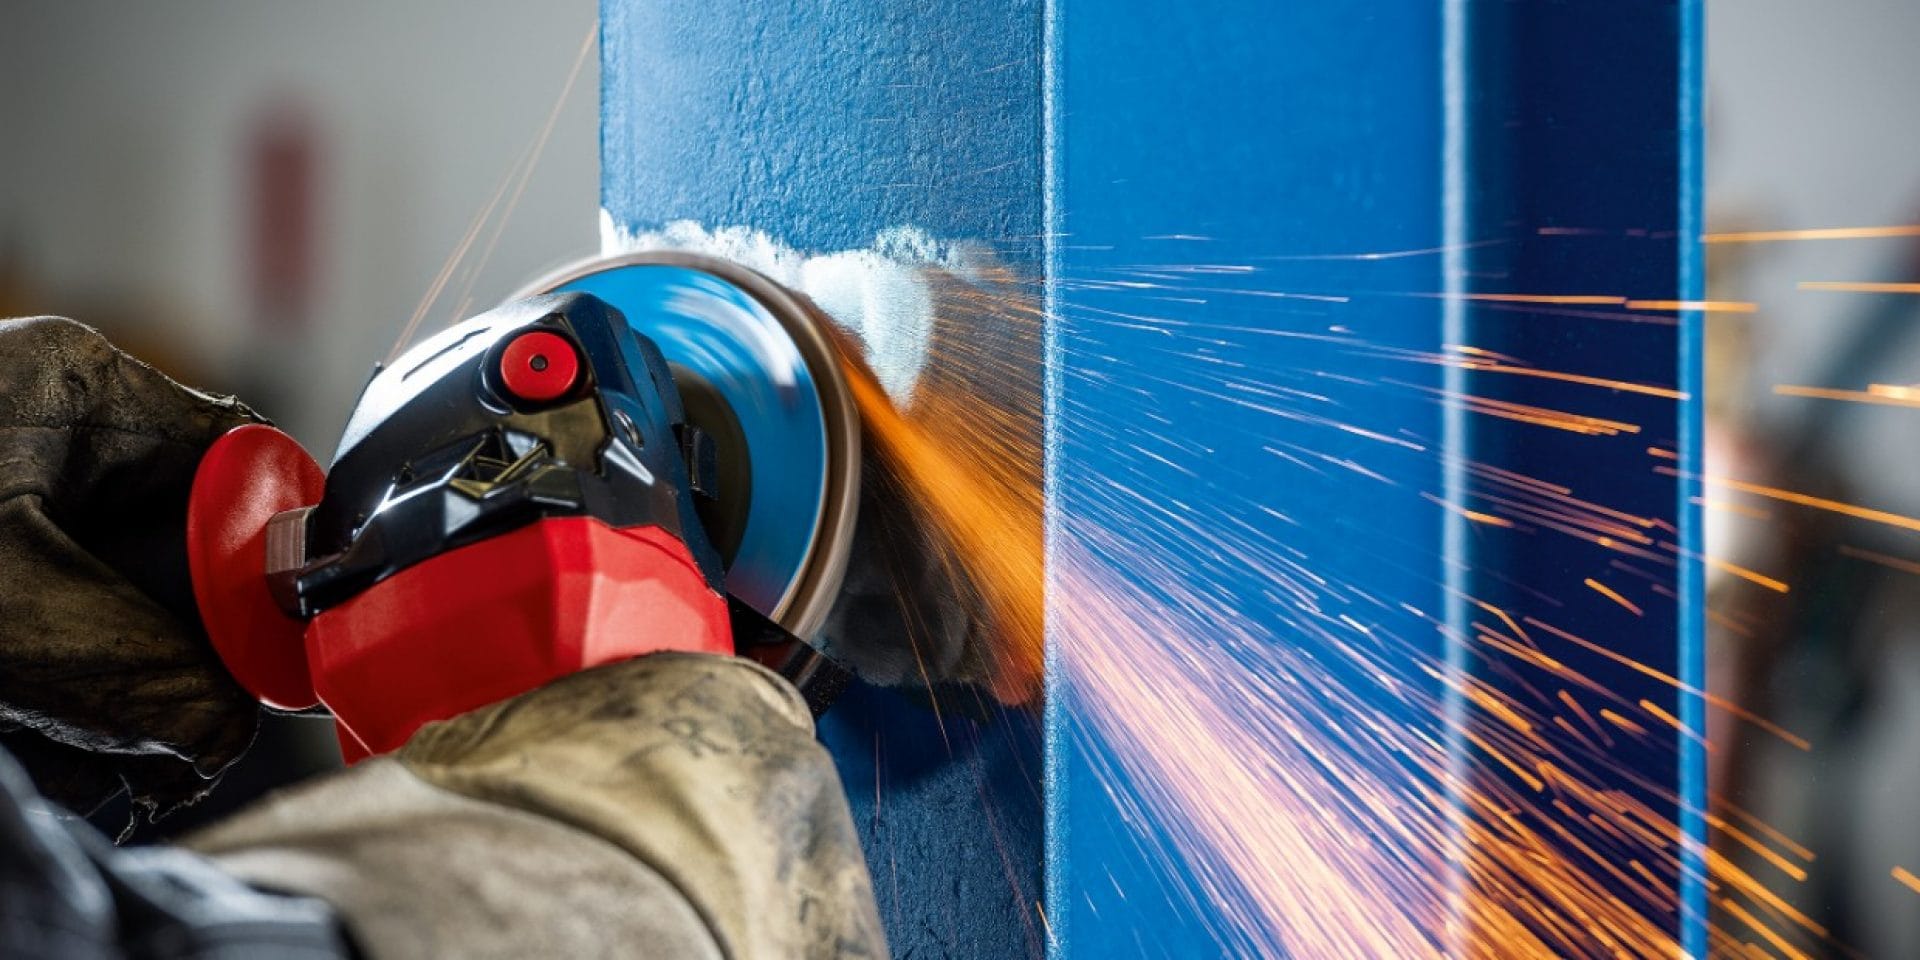 Preparing the coated steel using an angle grinder